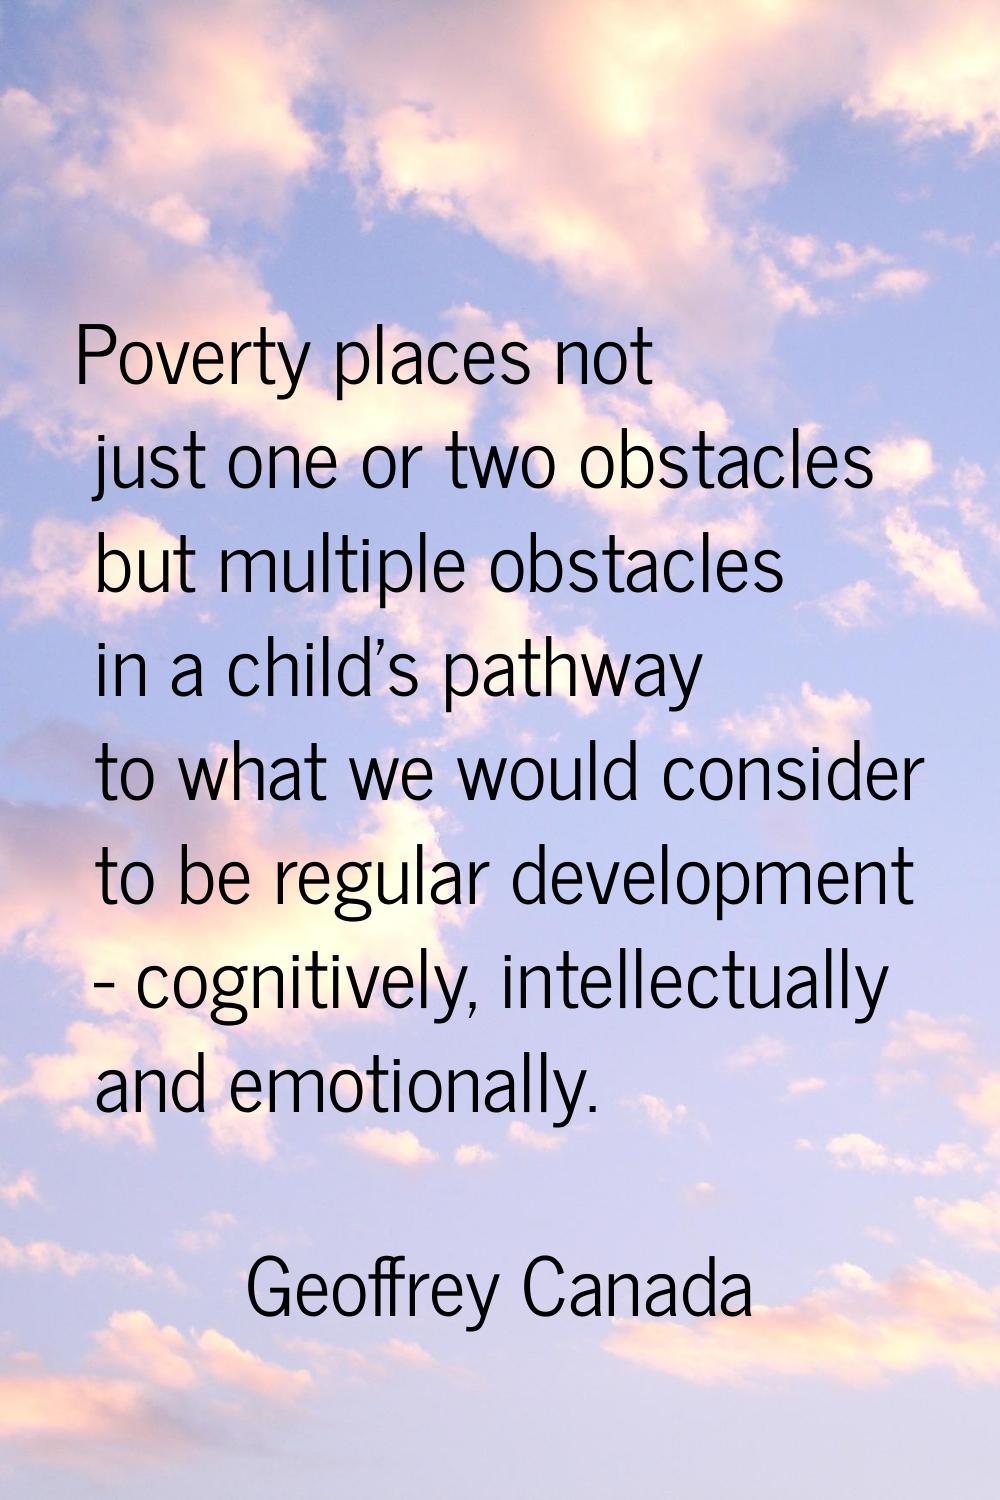 Poverty places not just one or two obstacles but multiple obstacles in a child's pathway to what we